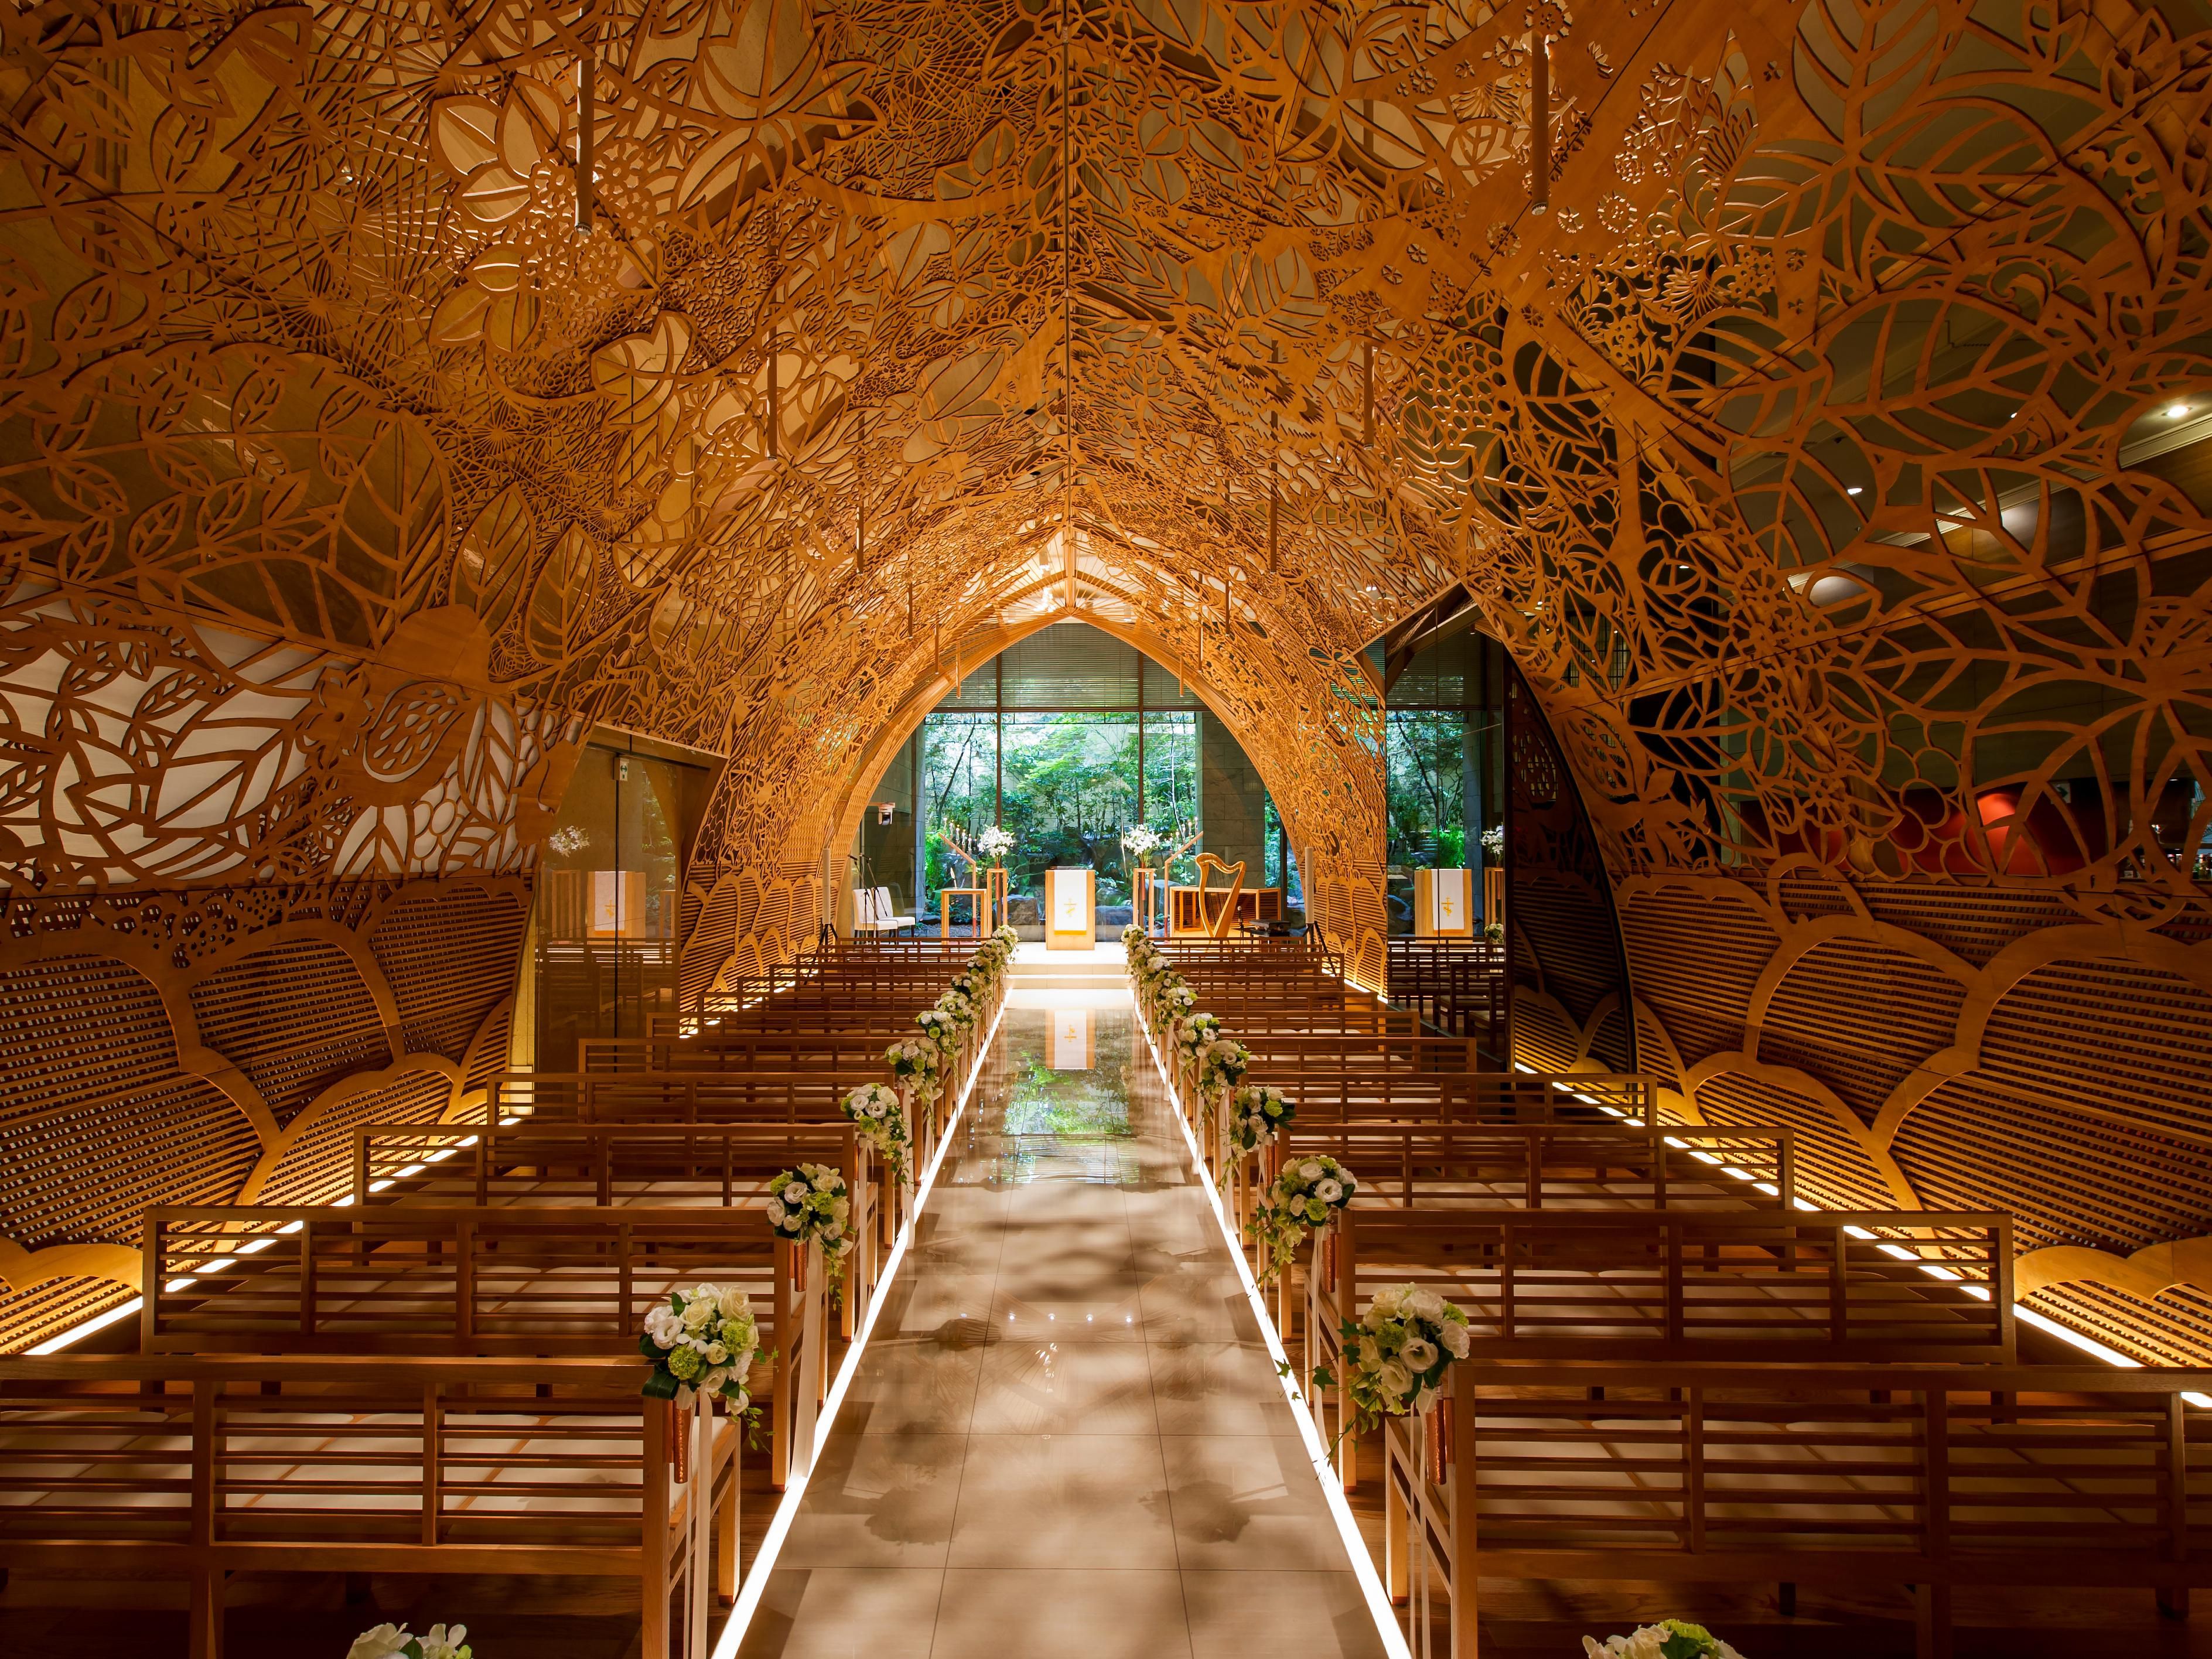 A gently sunlit aisle and flourished greenery behind the altar has woods like atmosphere. In the pure and comfortable space created by the harmony with art and nature, the ceremony is a celebration surrounded by the power of life and warmth of the guests.